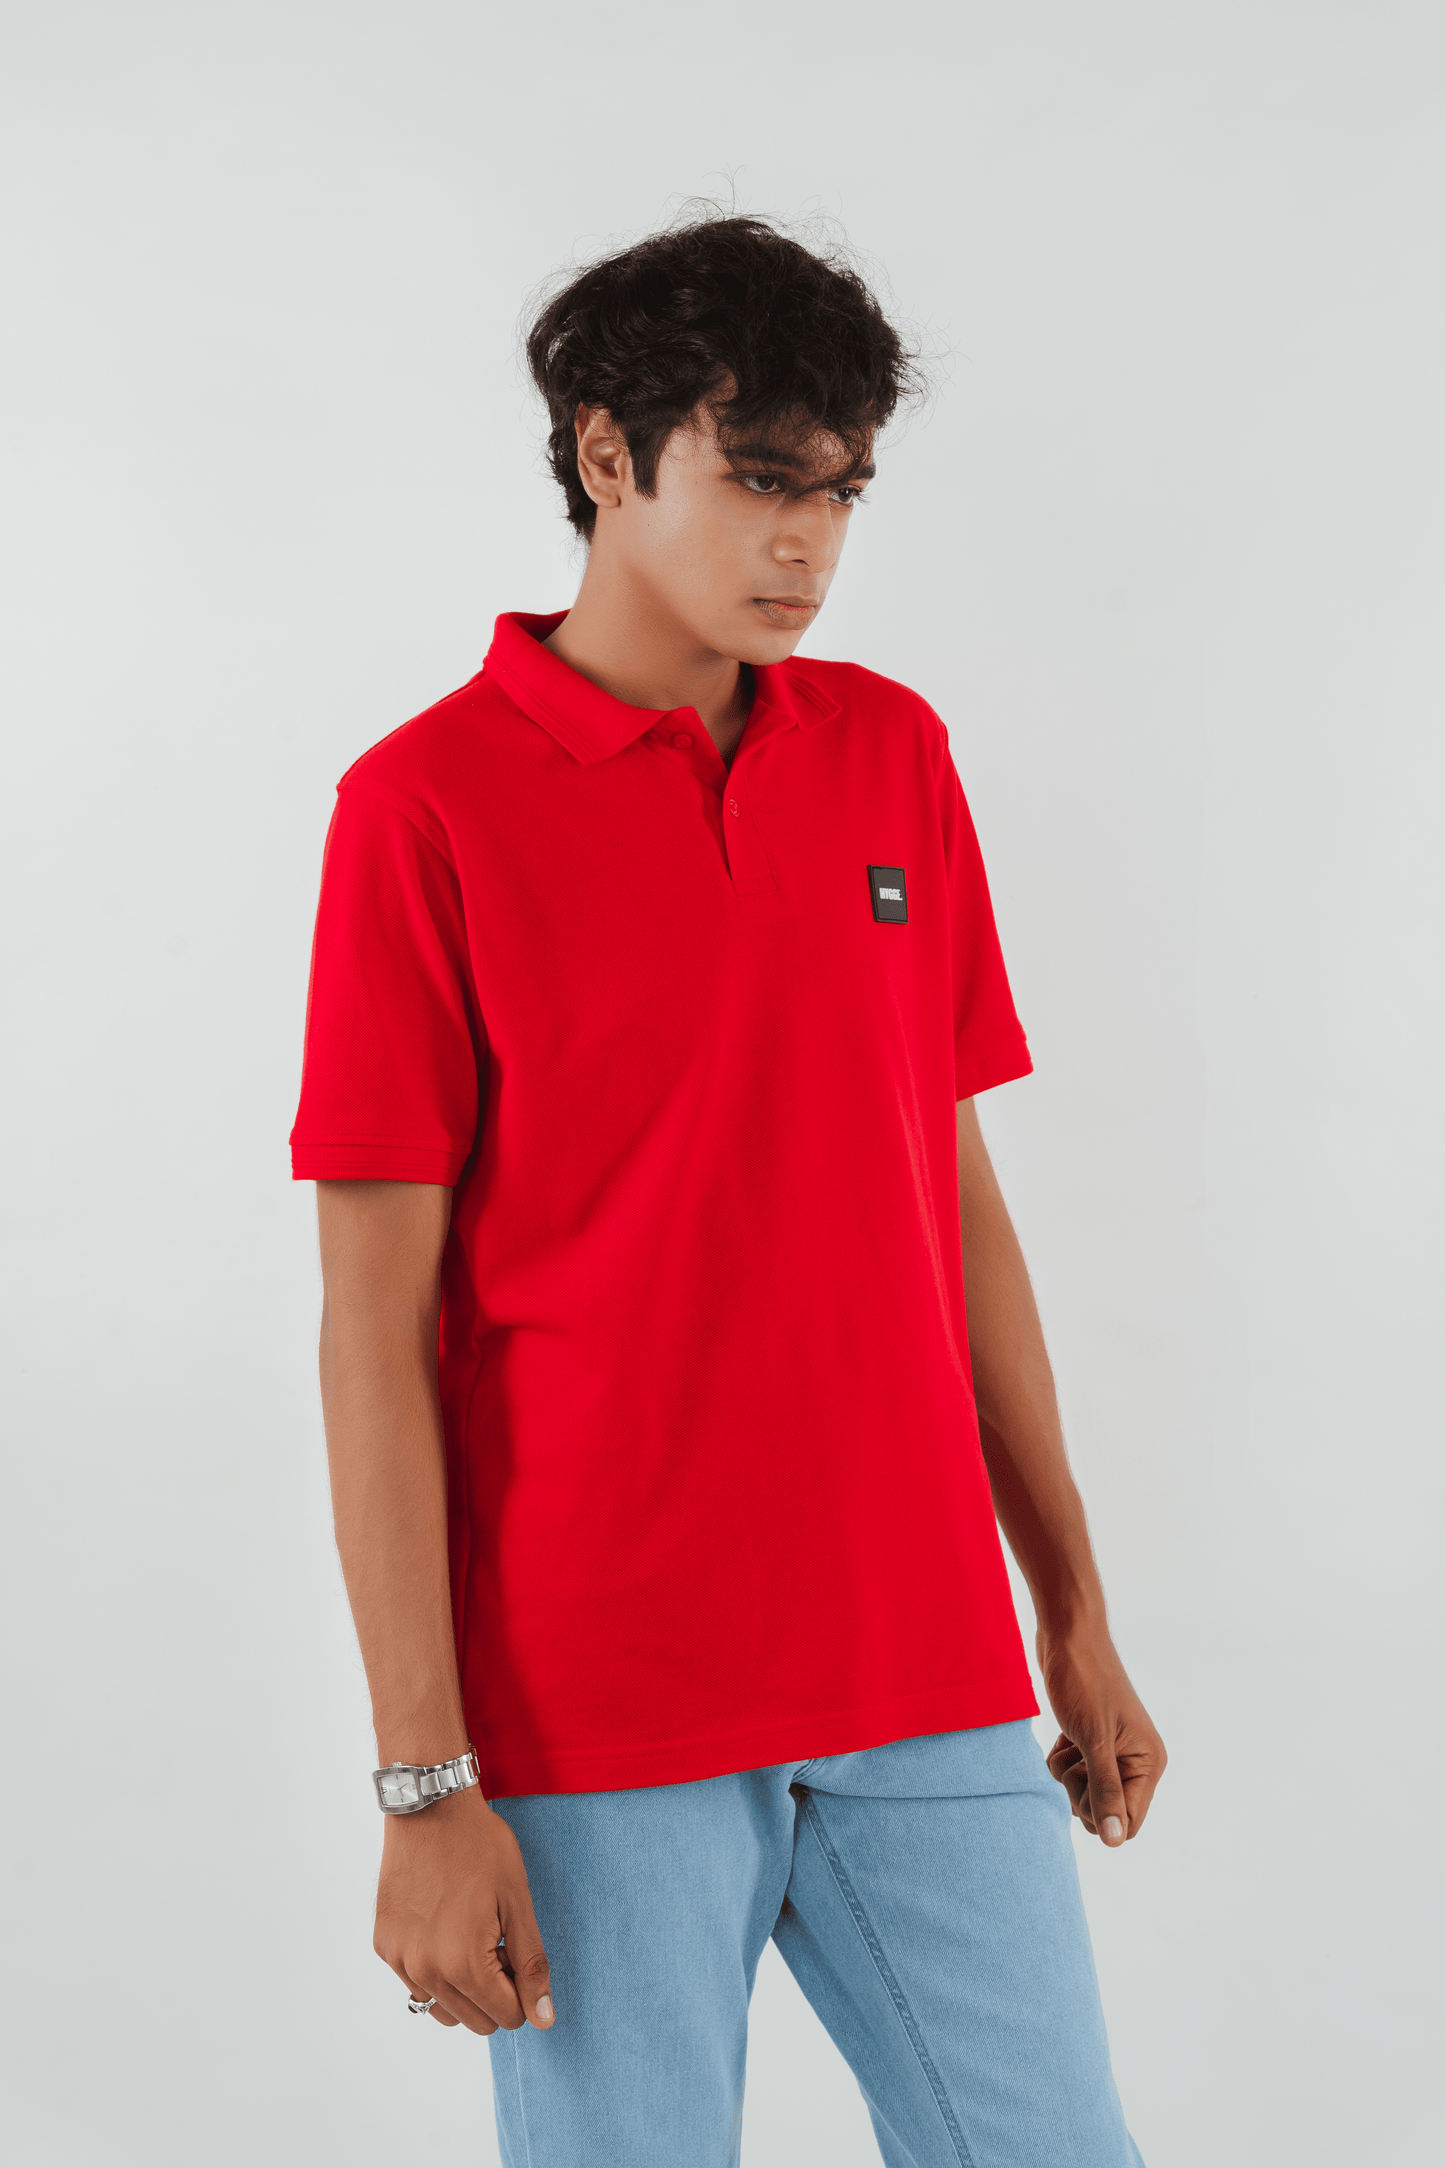 The Classic Polo T-Shirt